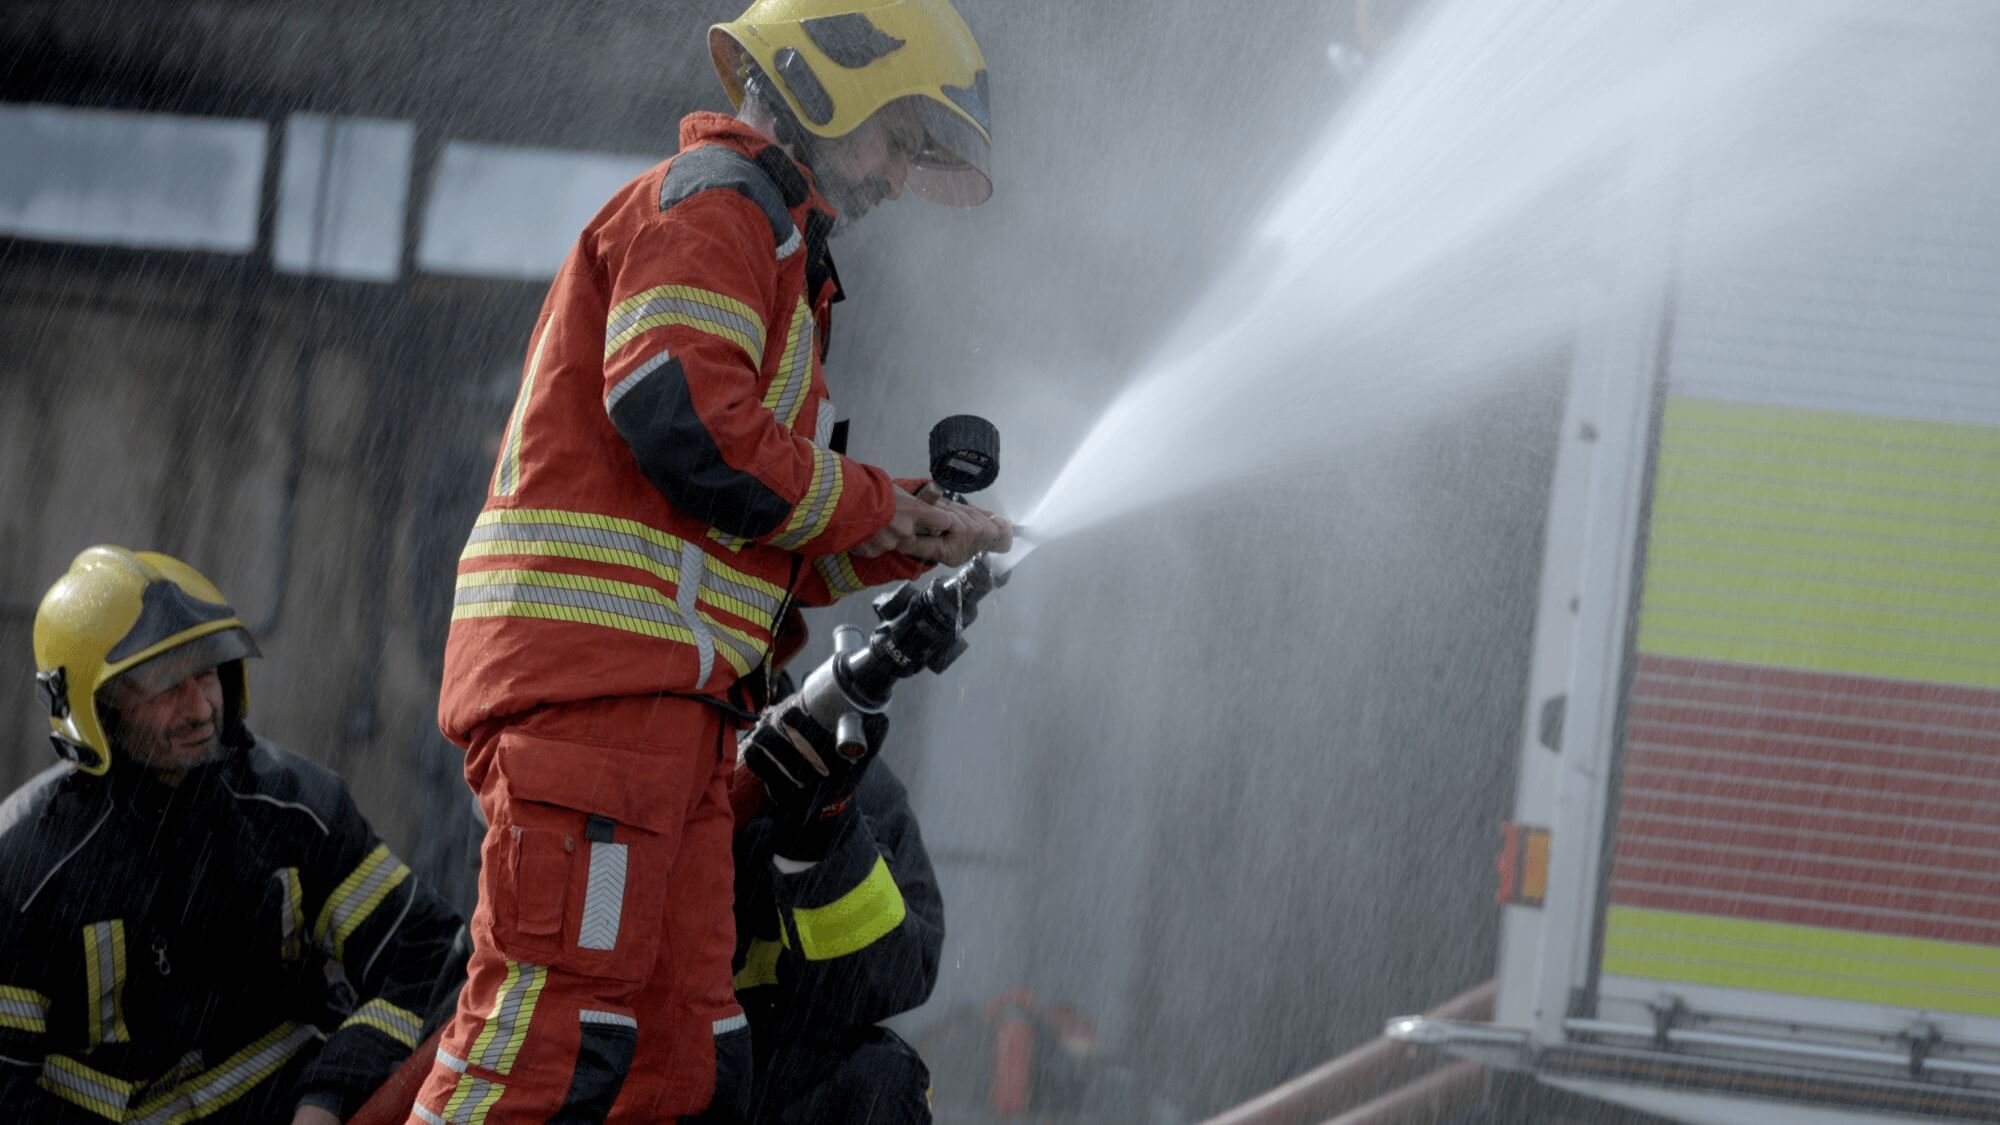 Firefighter training group dousing flames duotone